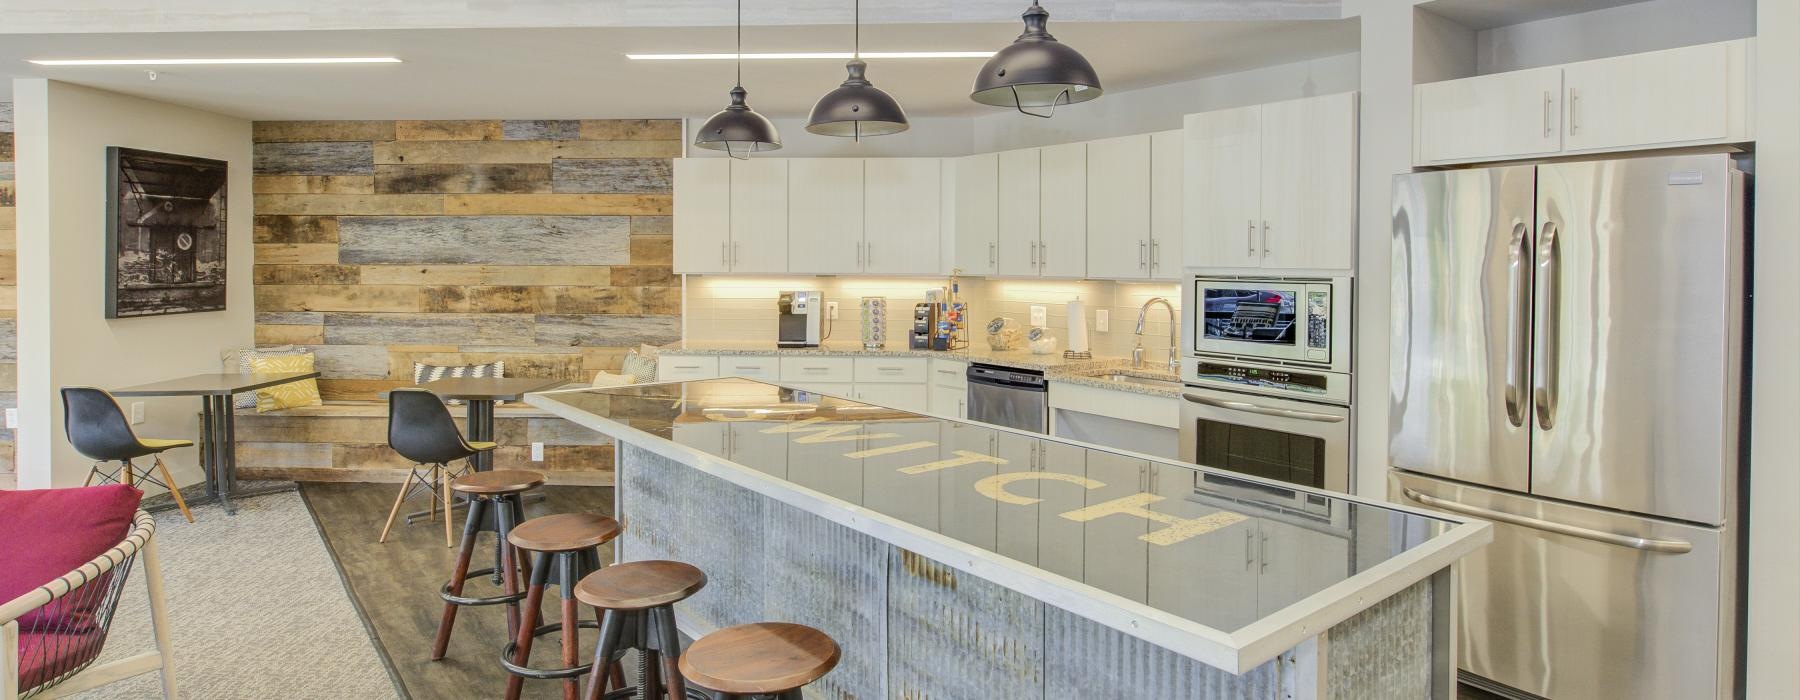 a kitchen with a bar stools and a bar stool